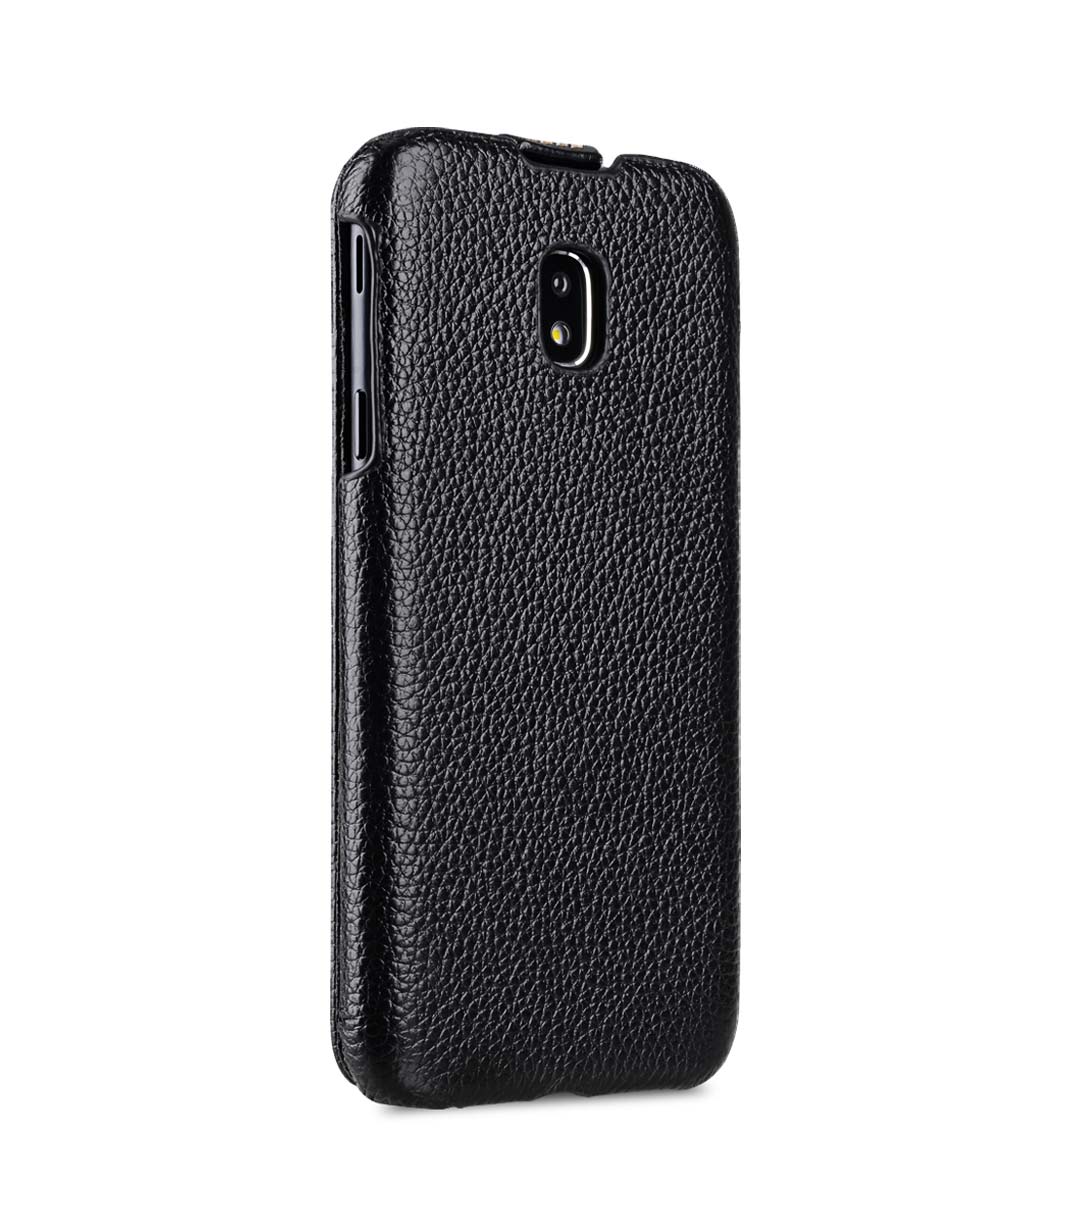 Premium Leather Case For Samsung Galaxy J3 17 Jacka Type Black Lc